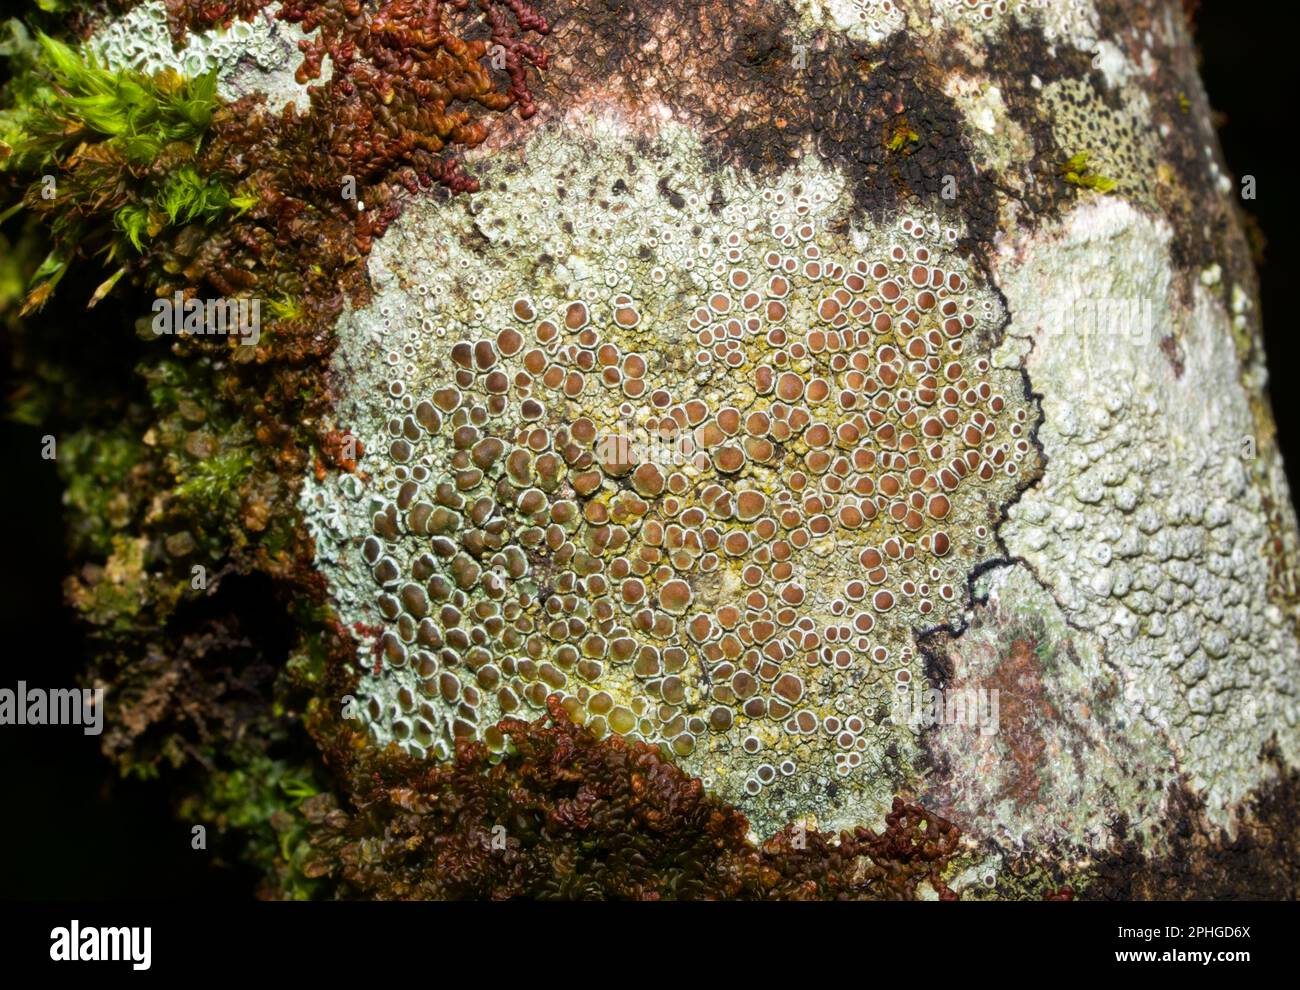 Lecanora chlarotera is a crustose lichen found on deciduous trees.It is widespread in the UK. Stock Photo